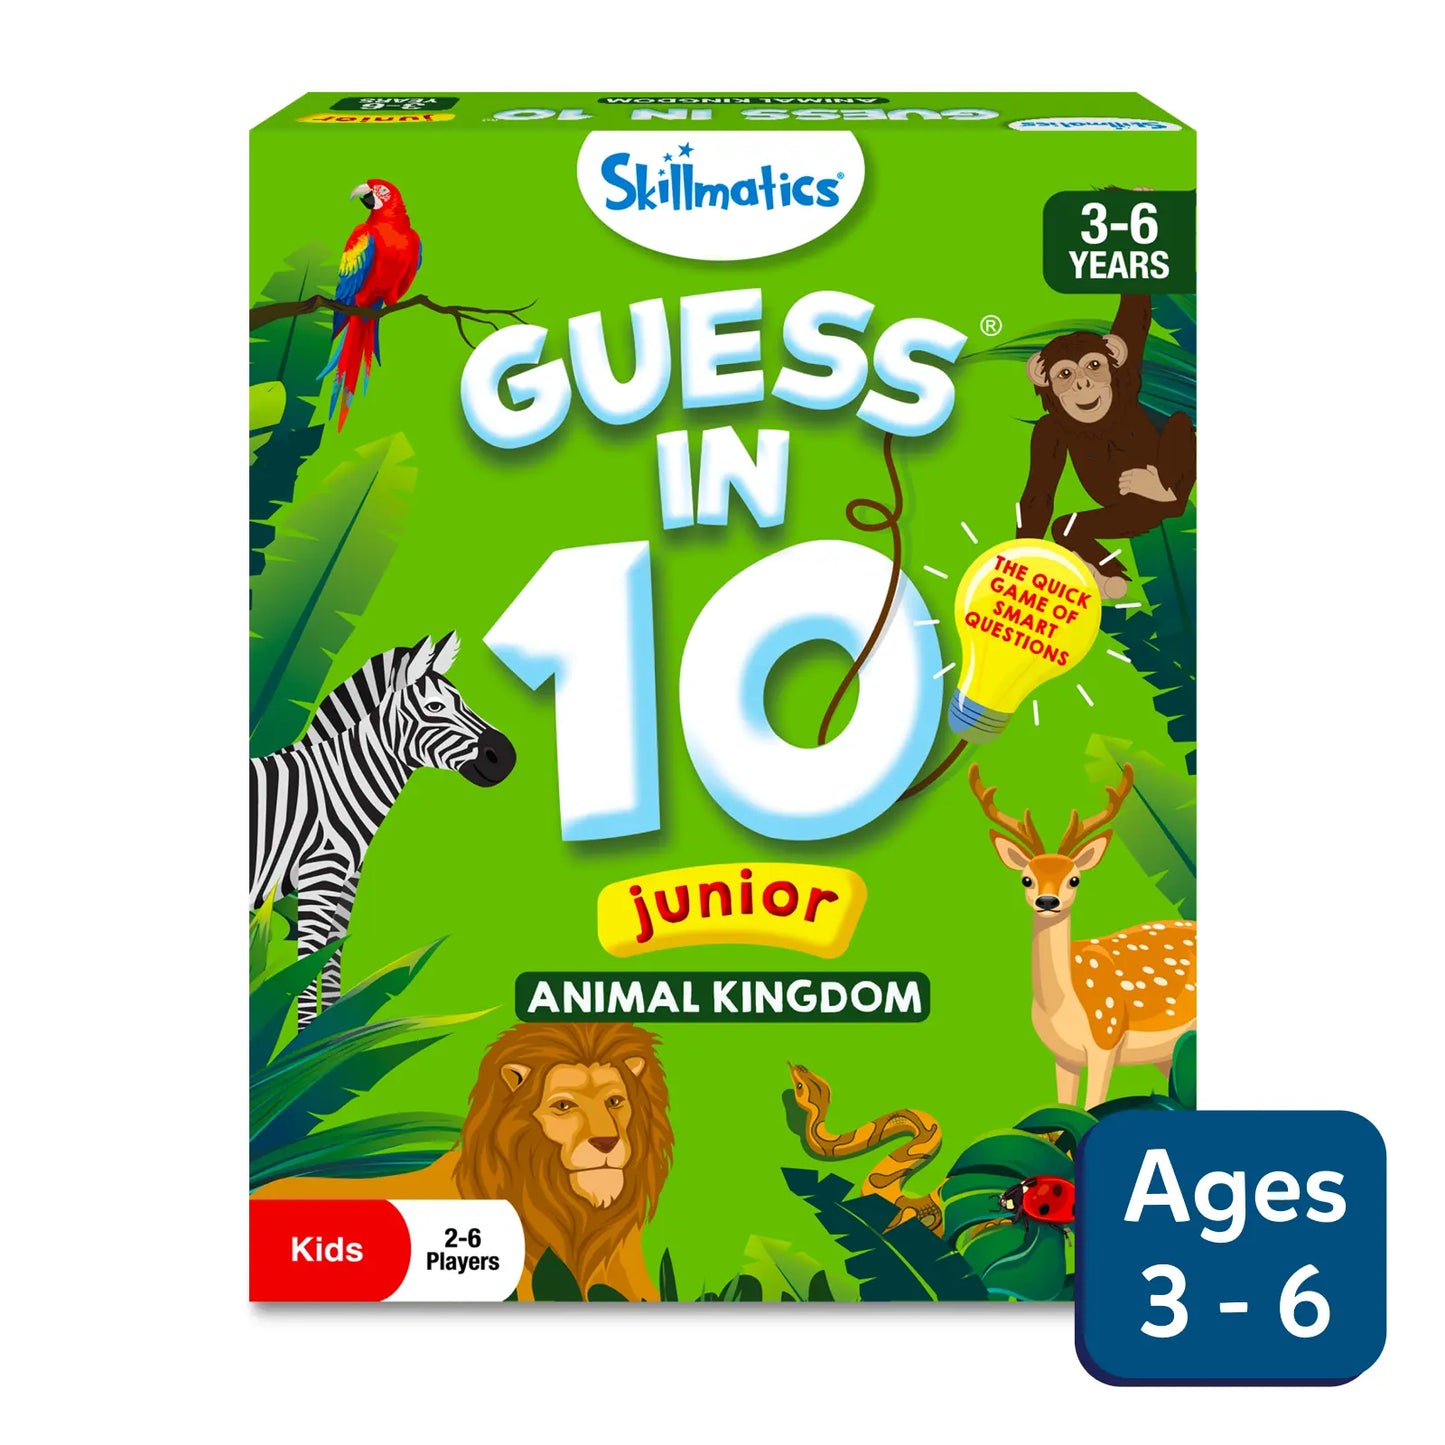 Guess in 10 Junior Animal World